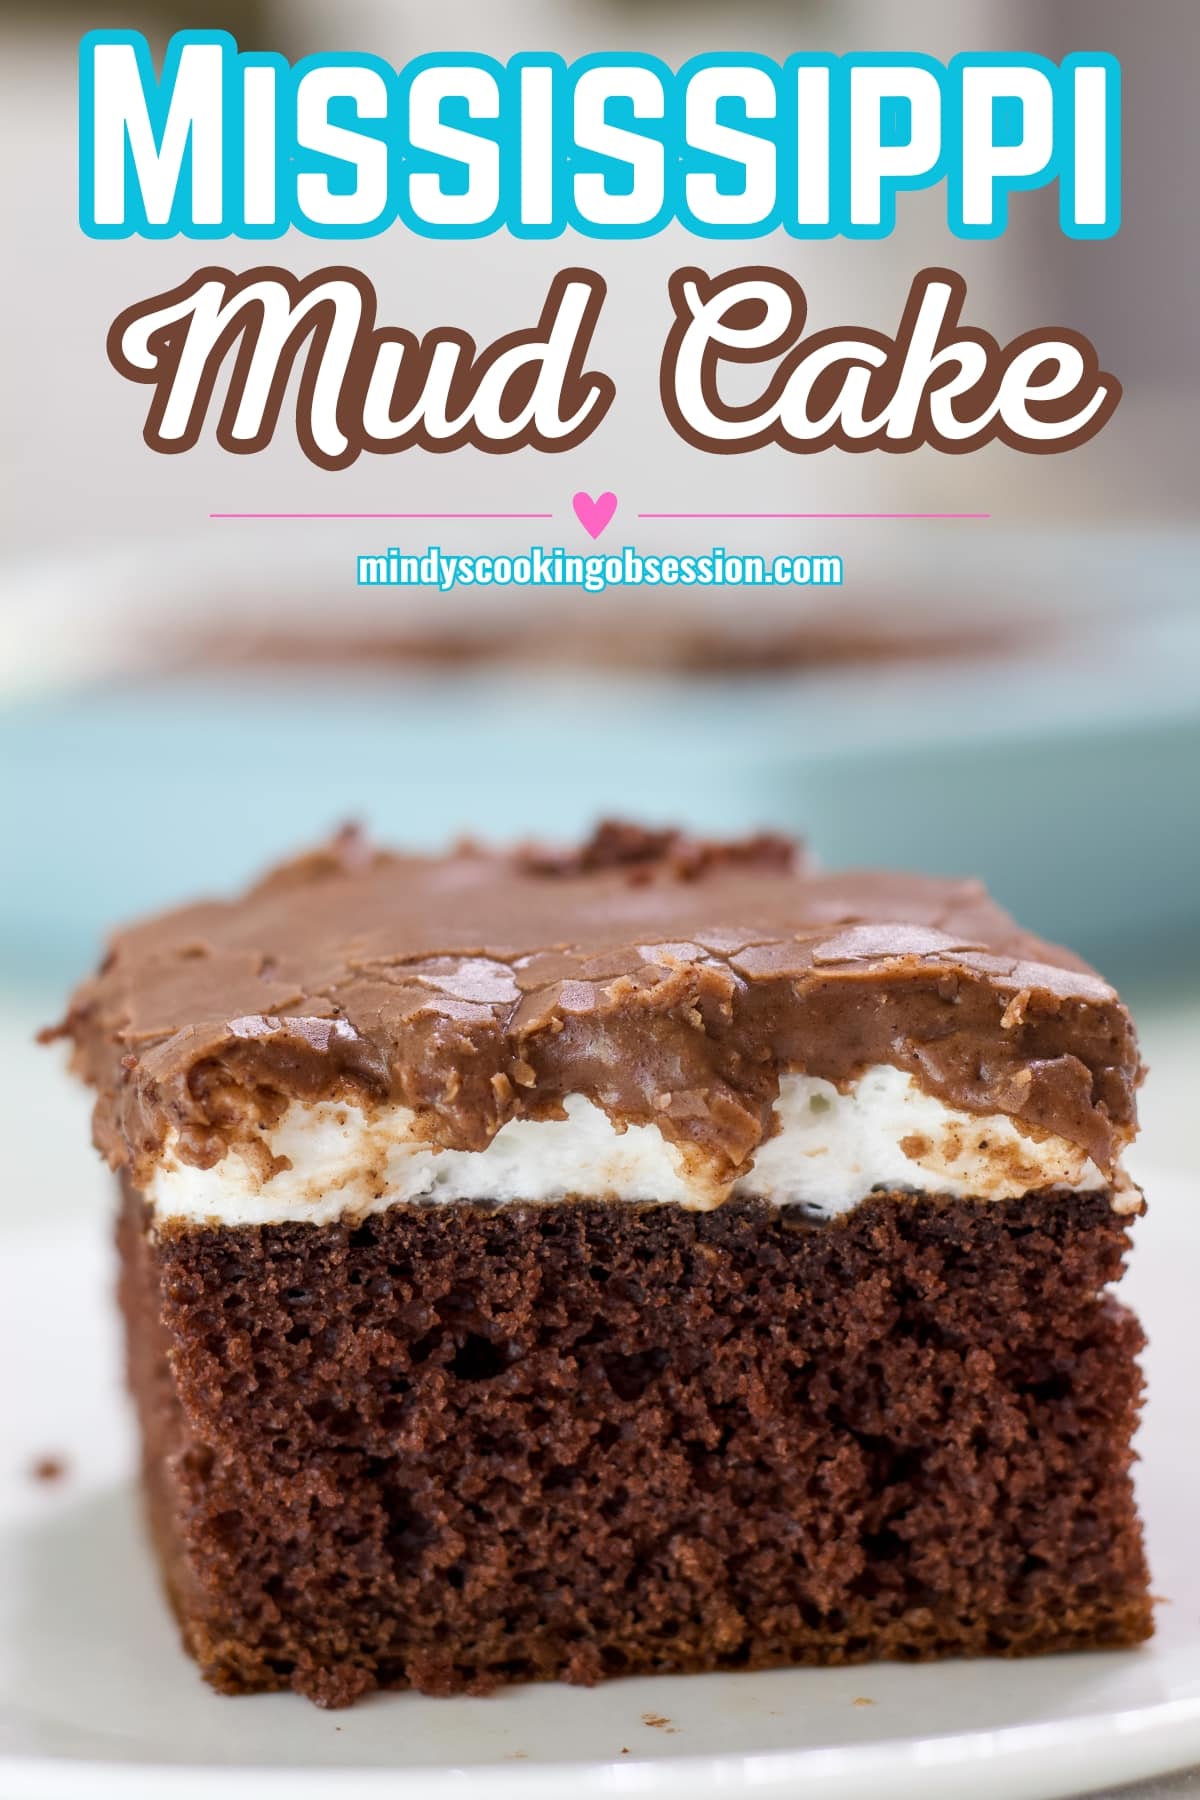 Perfectly moist chocolate cake is topped with mini marshmallows that are melted and topped with an easy chocolate icing. What makes my Mississippi Mud Cake such an easy recipe? I use a boxed cake mix that is transformed into tasting homemade by using a few tricks I've learned over the years. I mix this cake by hand so no stand mixer bowl or electric mixer beaters to wash. The creamy frosting is also made by hand and reminds me of the frosting on a Texas Sheet Cake or Lunch Lady Brownies.  via @mindyscookingobsession